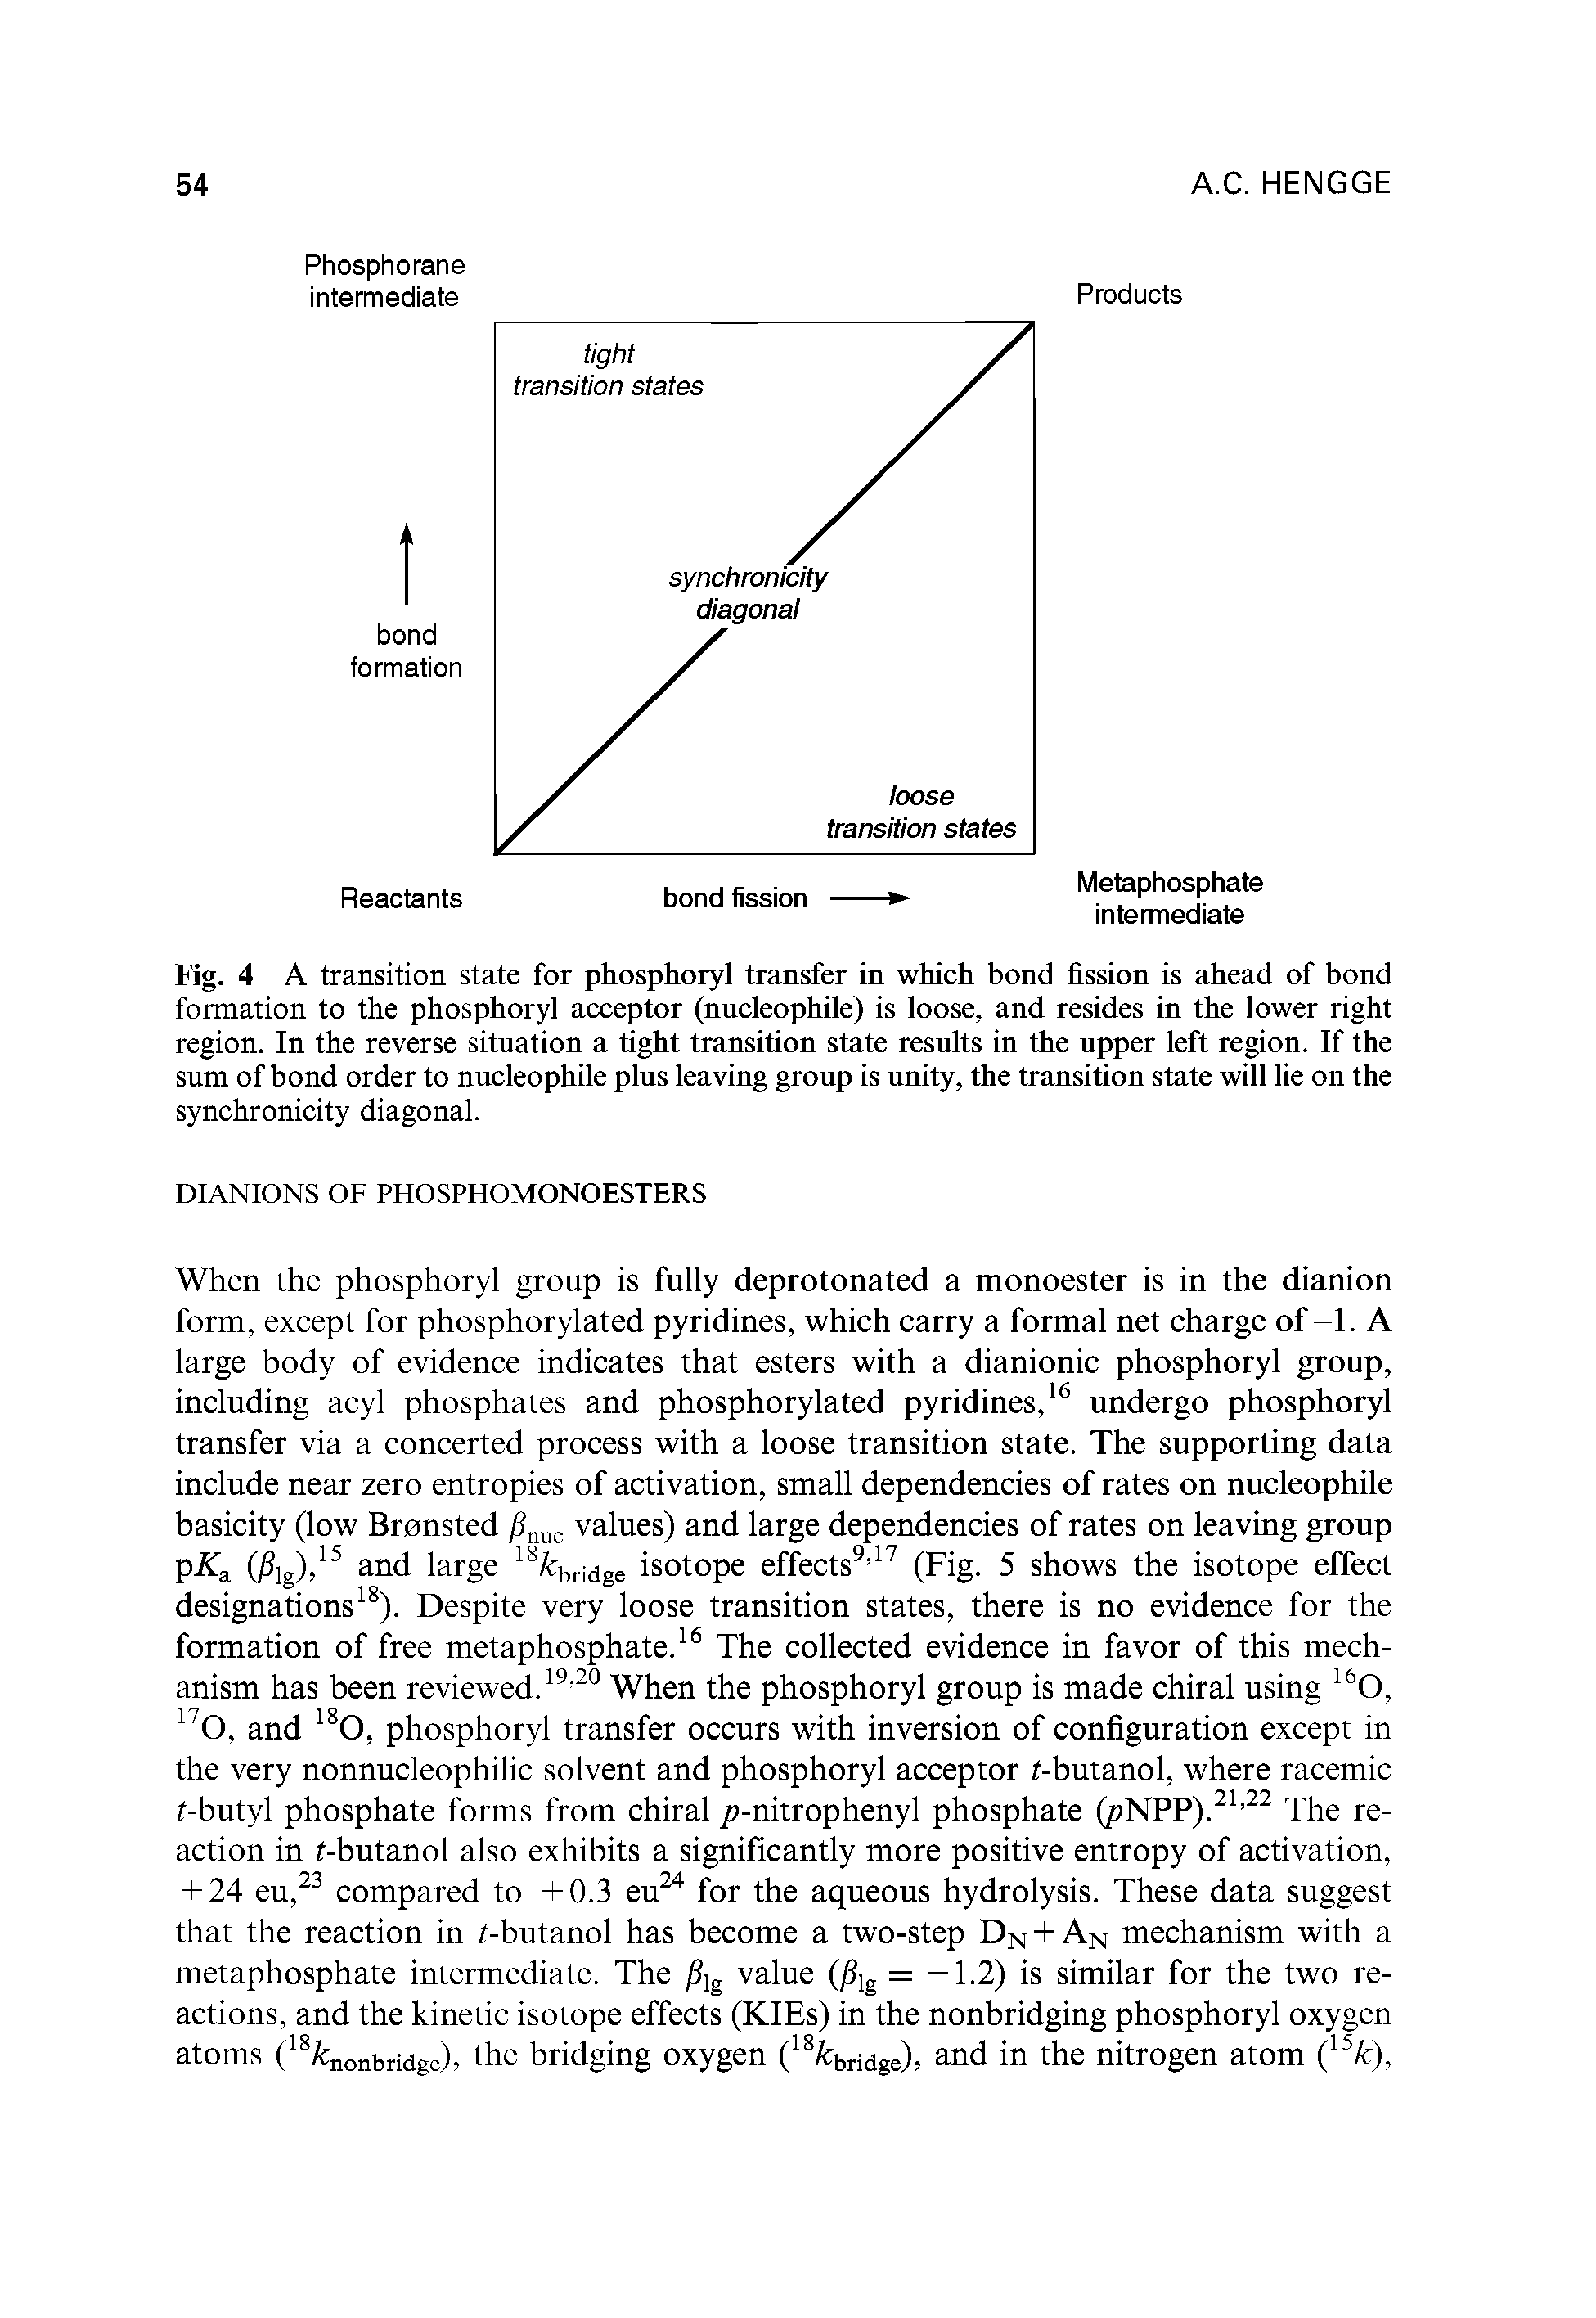 Fig. 4 A transition state for phosphoryl transfer in which bond fission is ahead of bond formation to the phosphoryl acceptor (nucleophile) is loose, and resides in the lower right region. In the reverse situation a tight transition state results in the upper left region. If the sum of bond order to nucleophile plus leaving group is unity, the transition state will lie on the synchronicity diagonal.